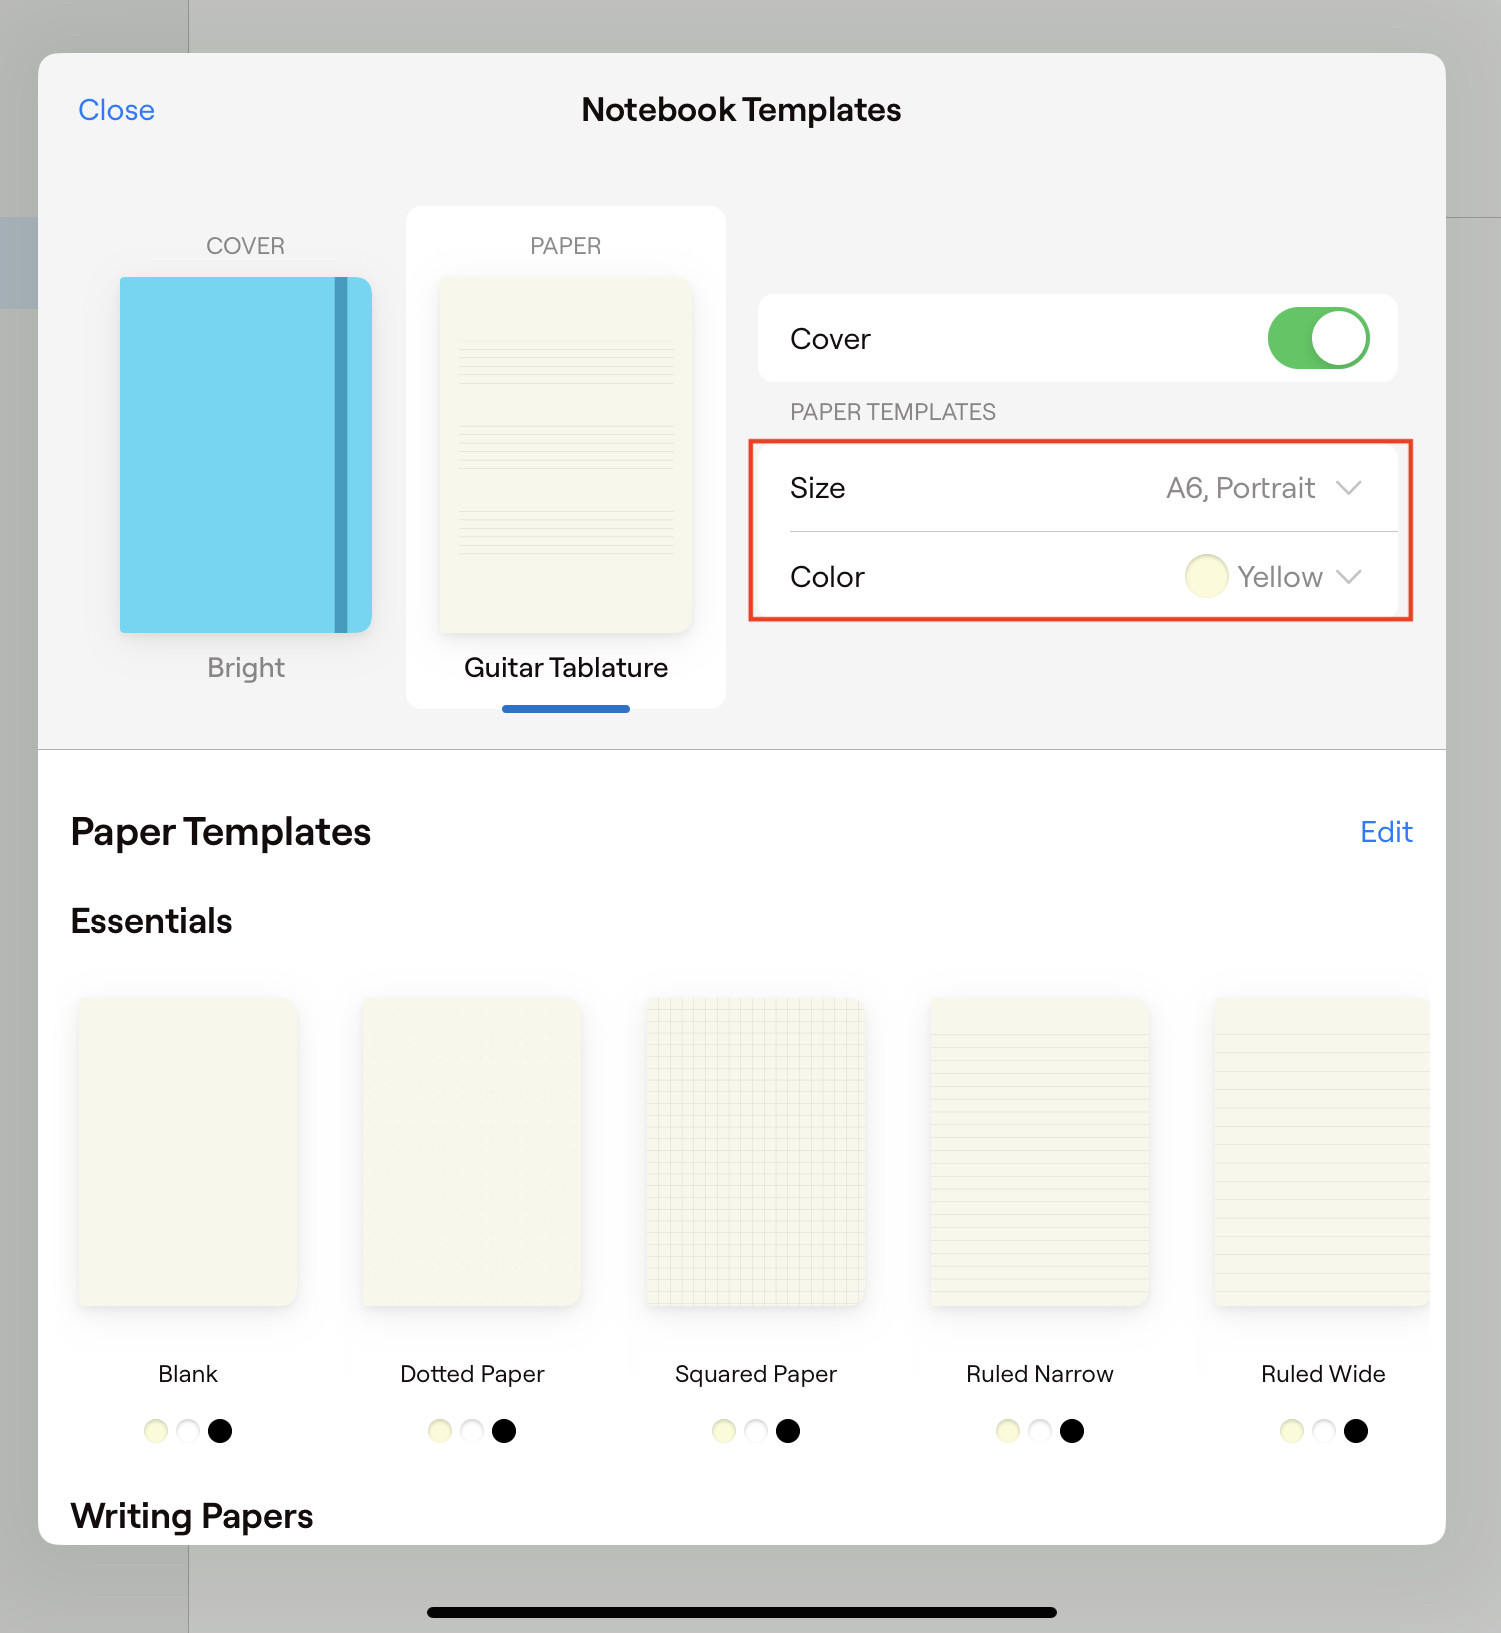 customize-templates-in-goodnotes-6-goodnotes-support